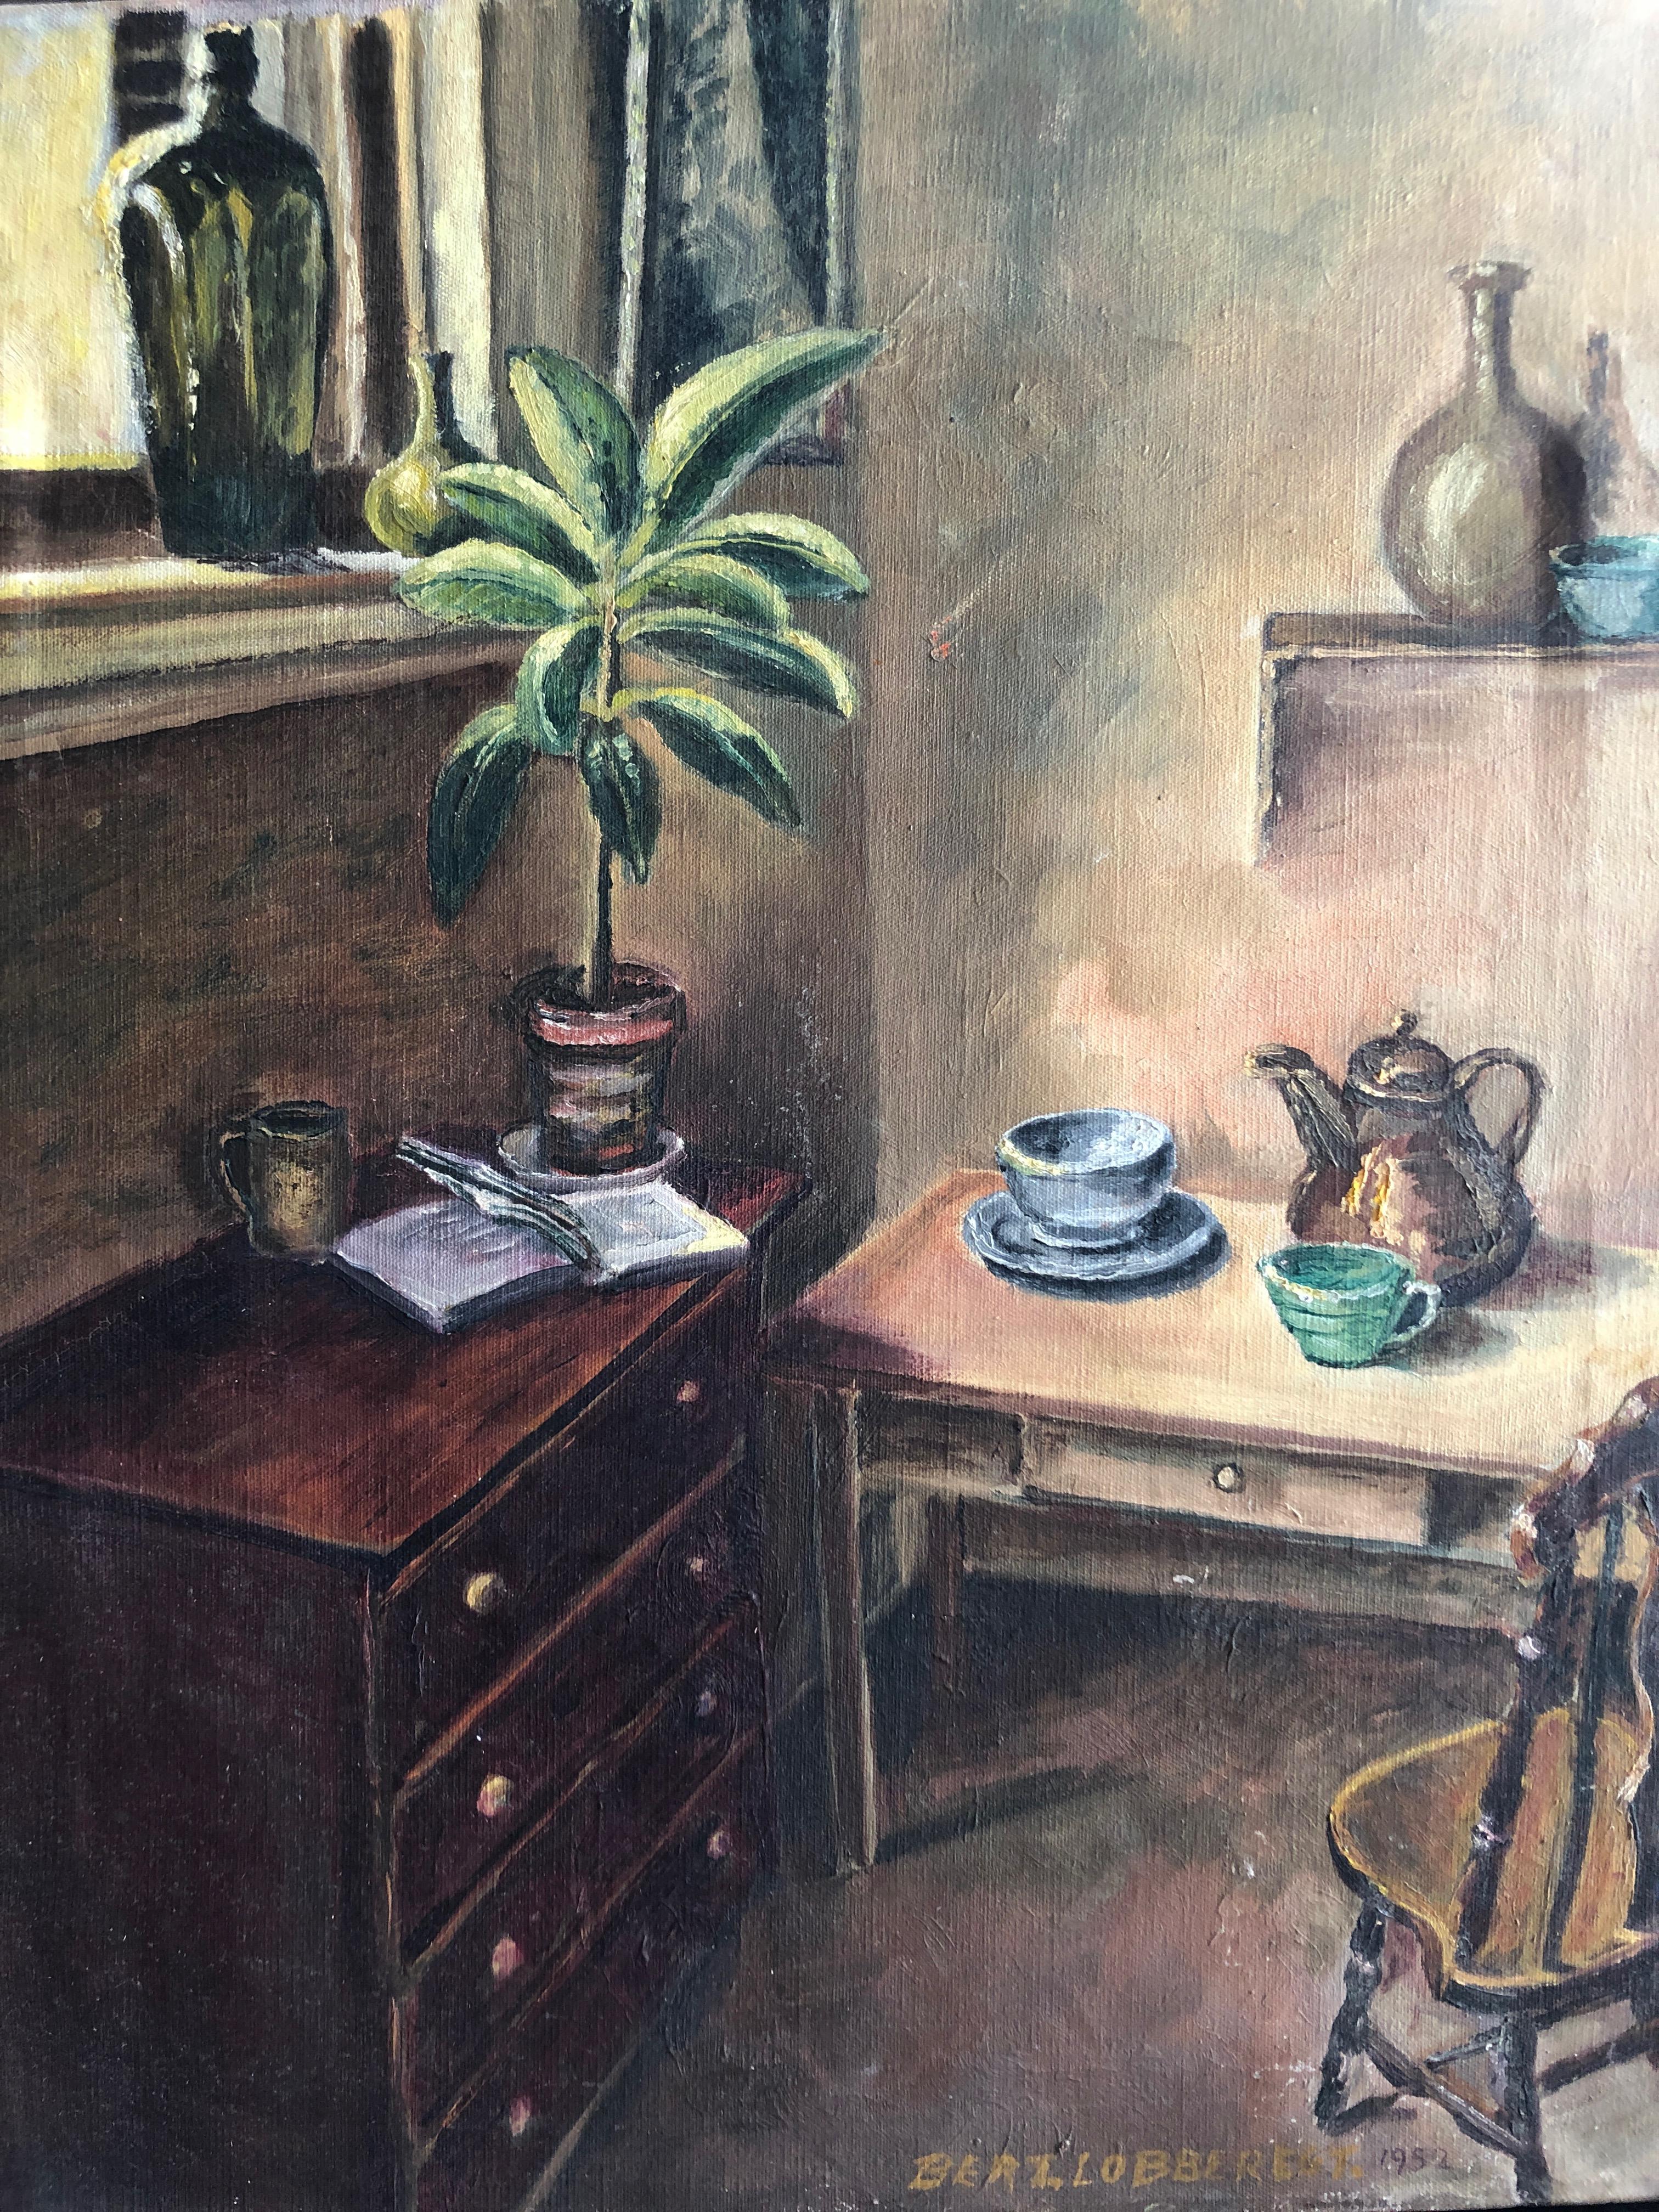 This is lovely sitting room still life oil on canvas signed on the bottom front 